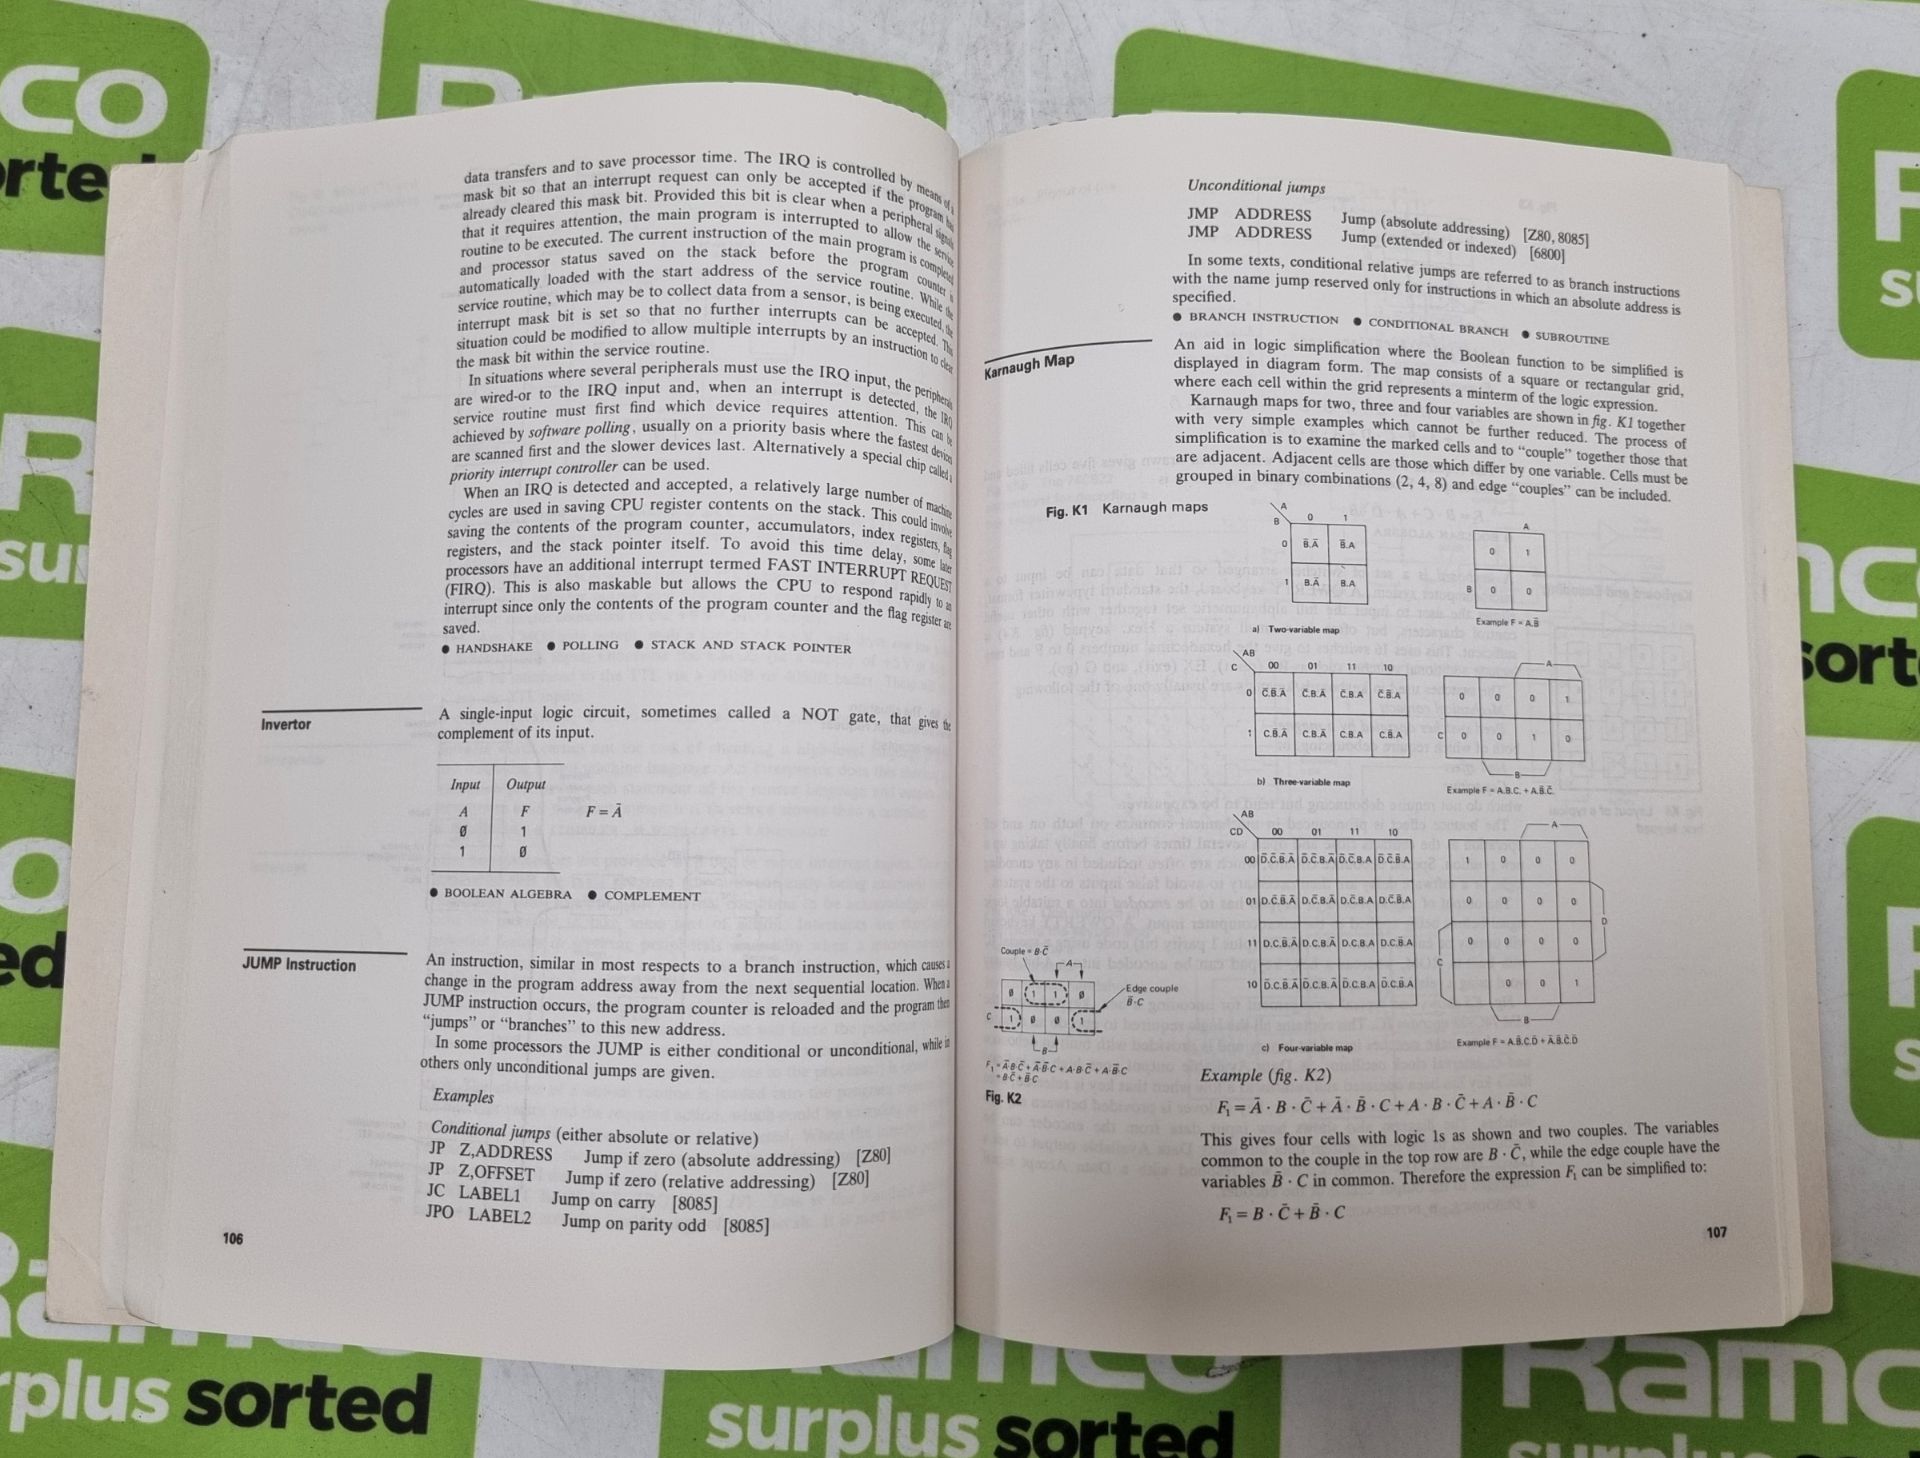 Your evening class: Basic Computing, Microprocessor Sourcebook, Scott Mueller's Upgrading and Repair - Image 10 of 11